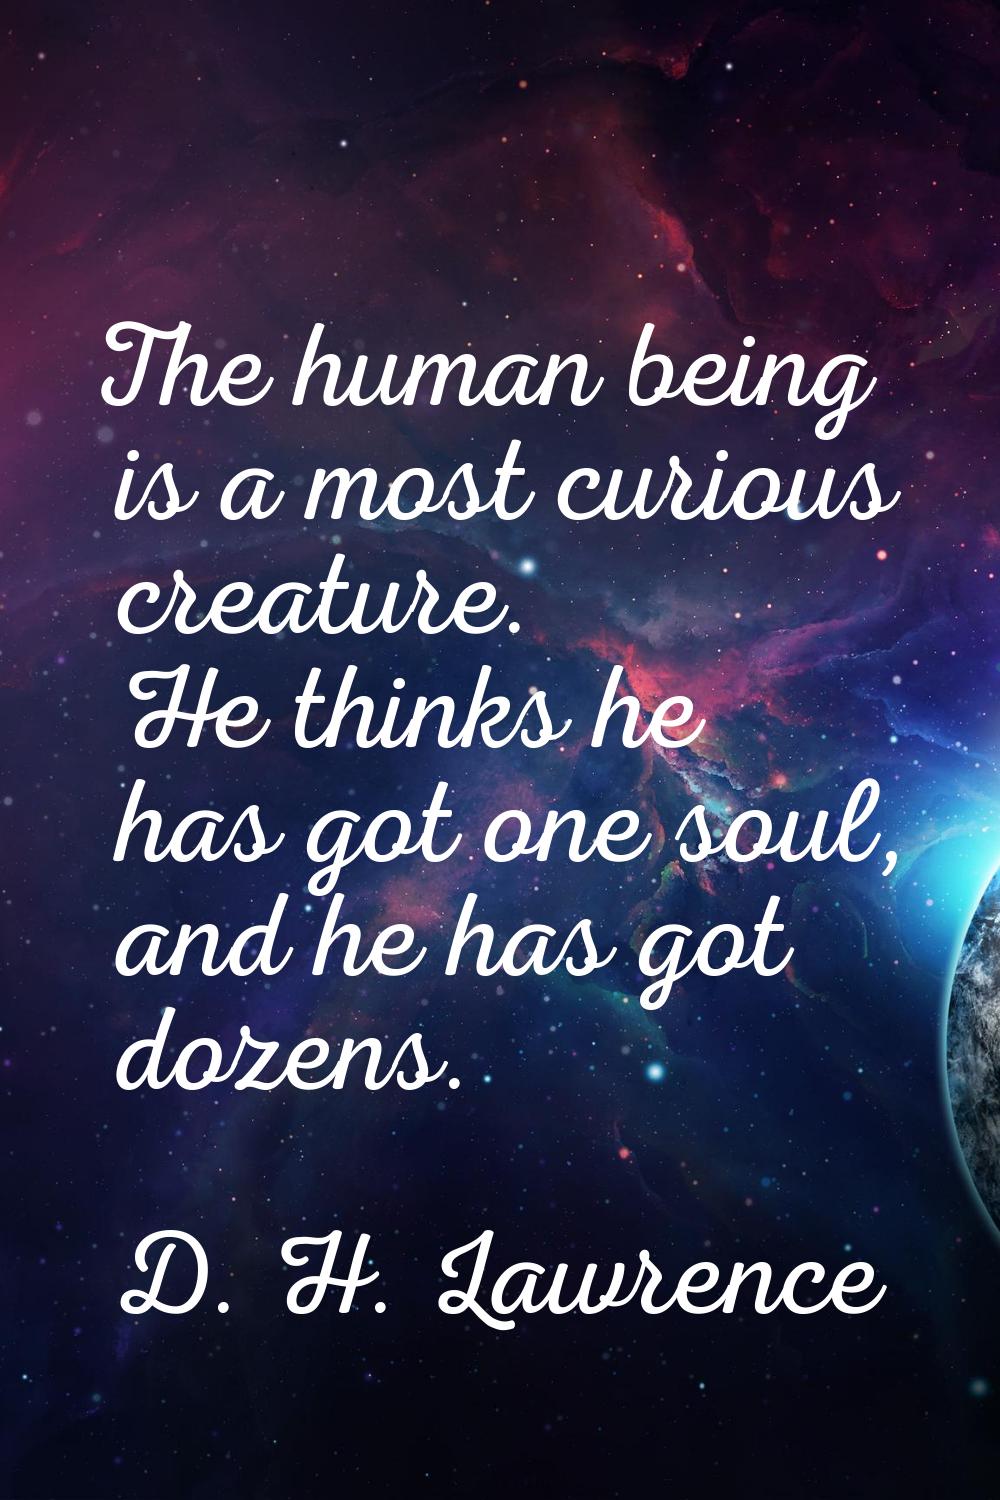 The human being is a most curious creature. He thinks he has got one soul, and he has got dozens.